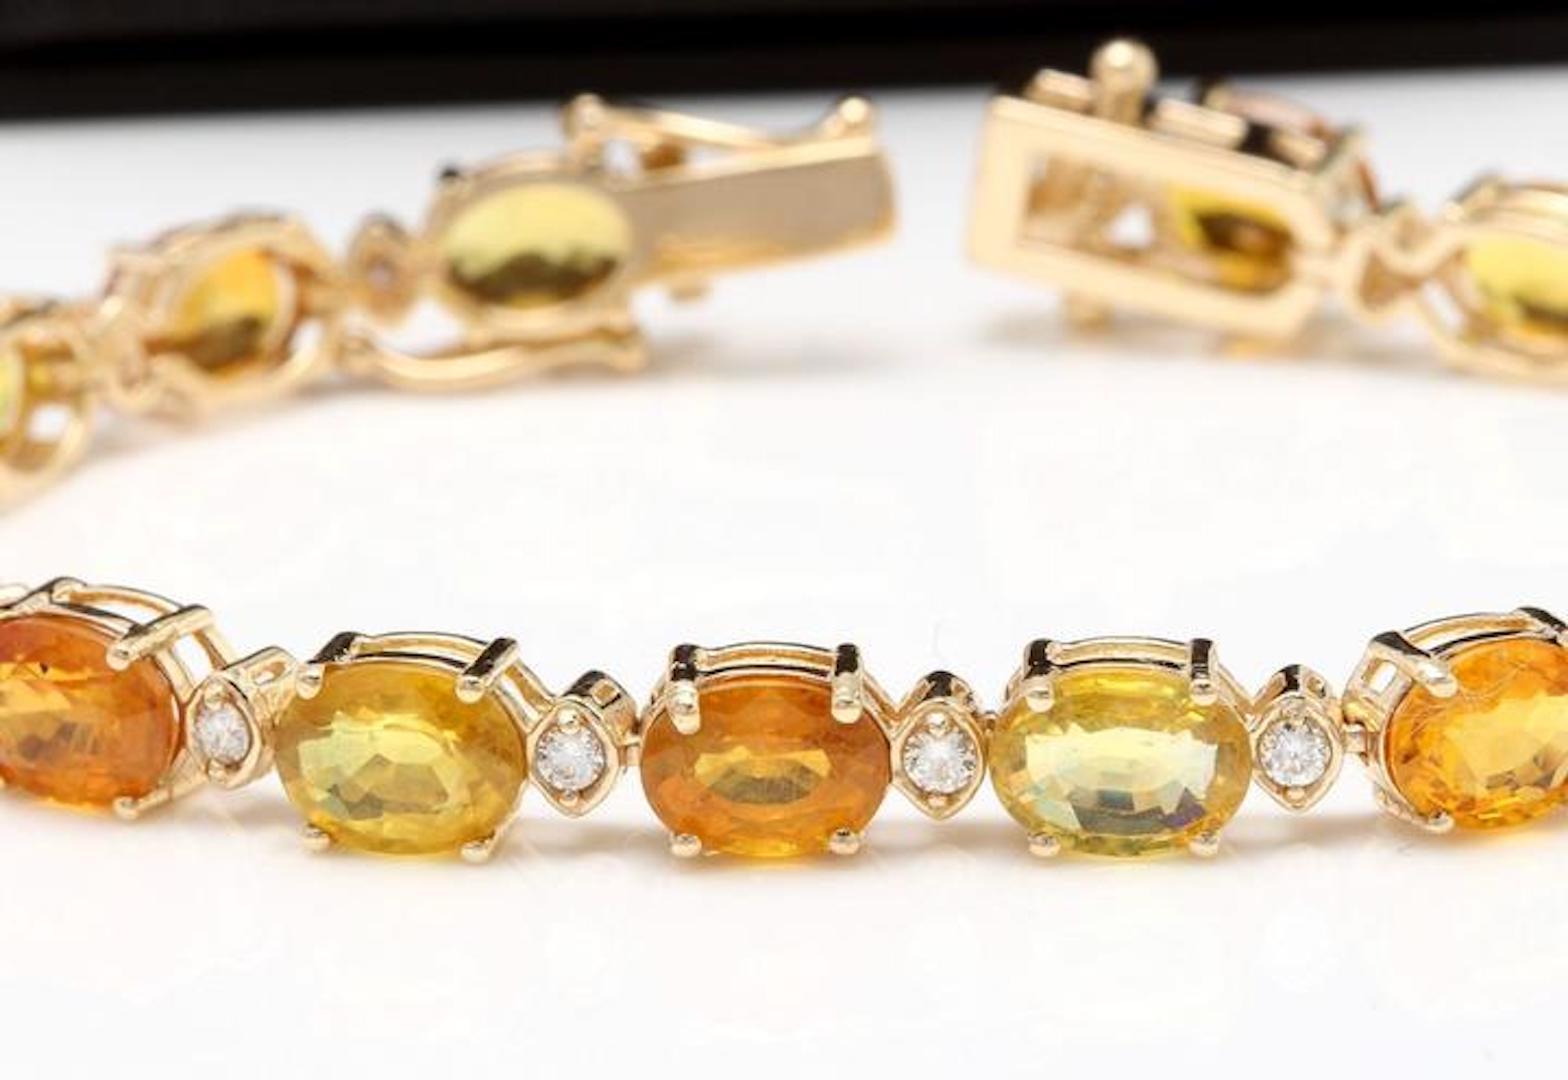 Very Impressive 30.65 Carats Natural Sapphire & Diamond 14K Solid Yellow Gold Bracelet

STAMPED: 14K

Total Natural Round Diamonds Weight: .65 Carats (color F-G / Clarity VS2-SI1)

Total Natural Sapphire Weight is: 30.00 carats

Bracelet length is: